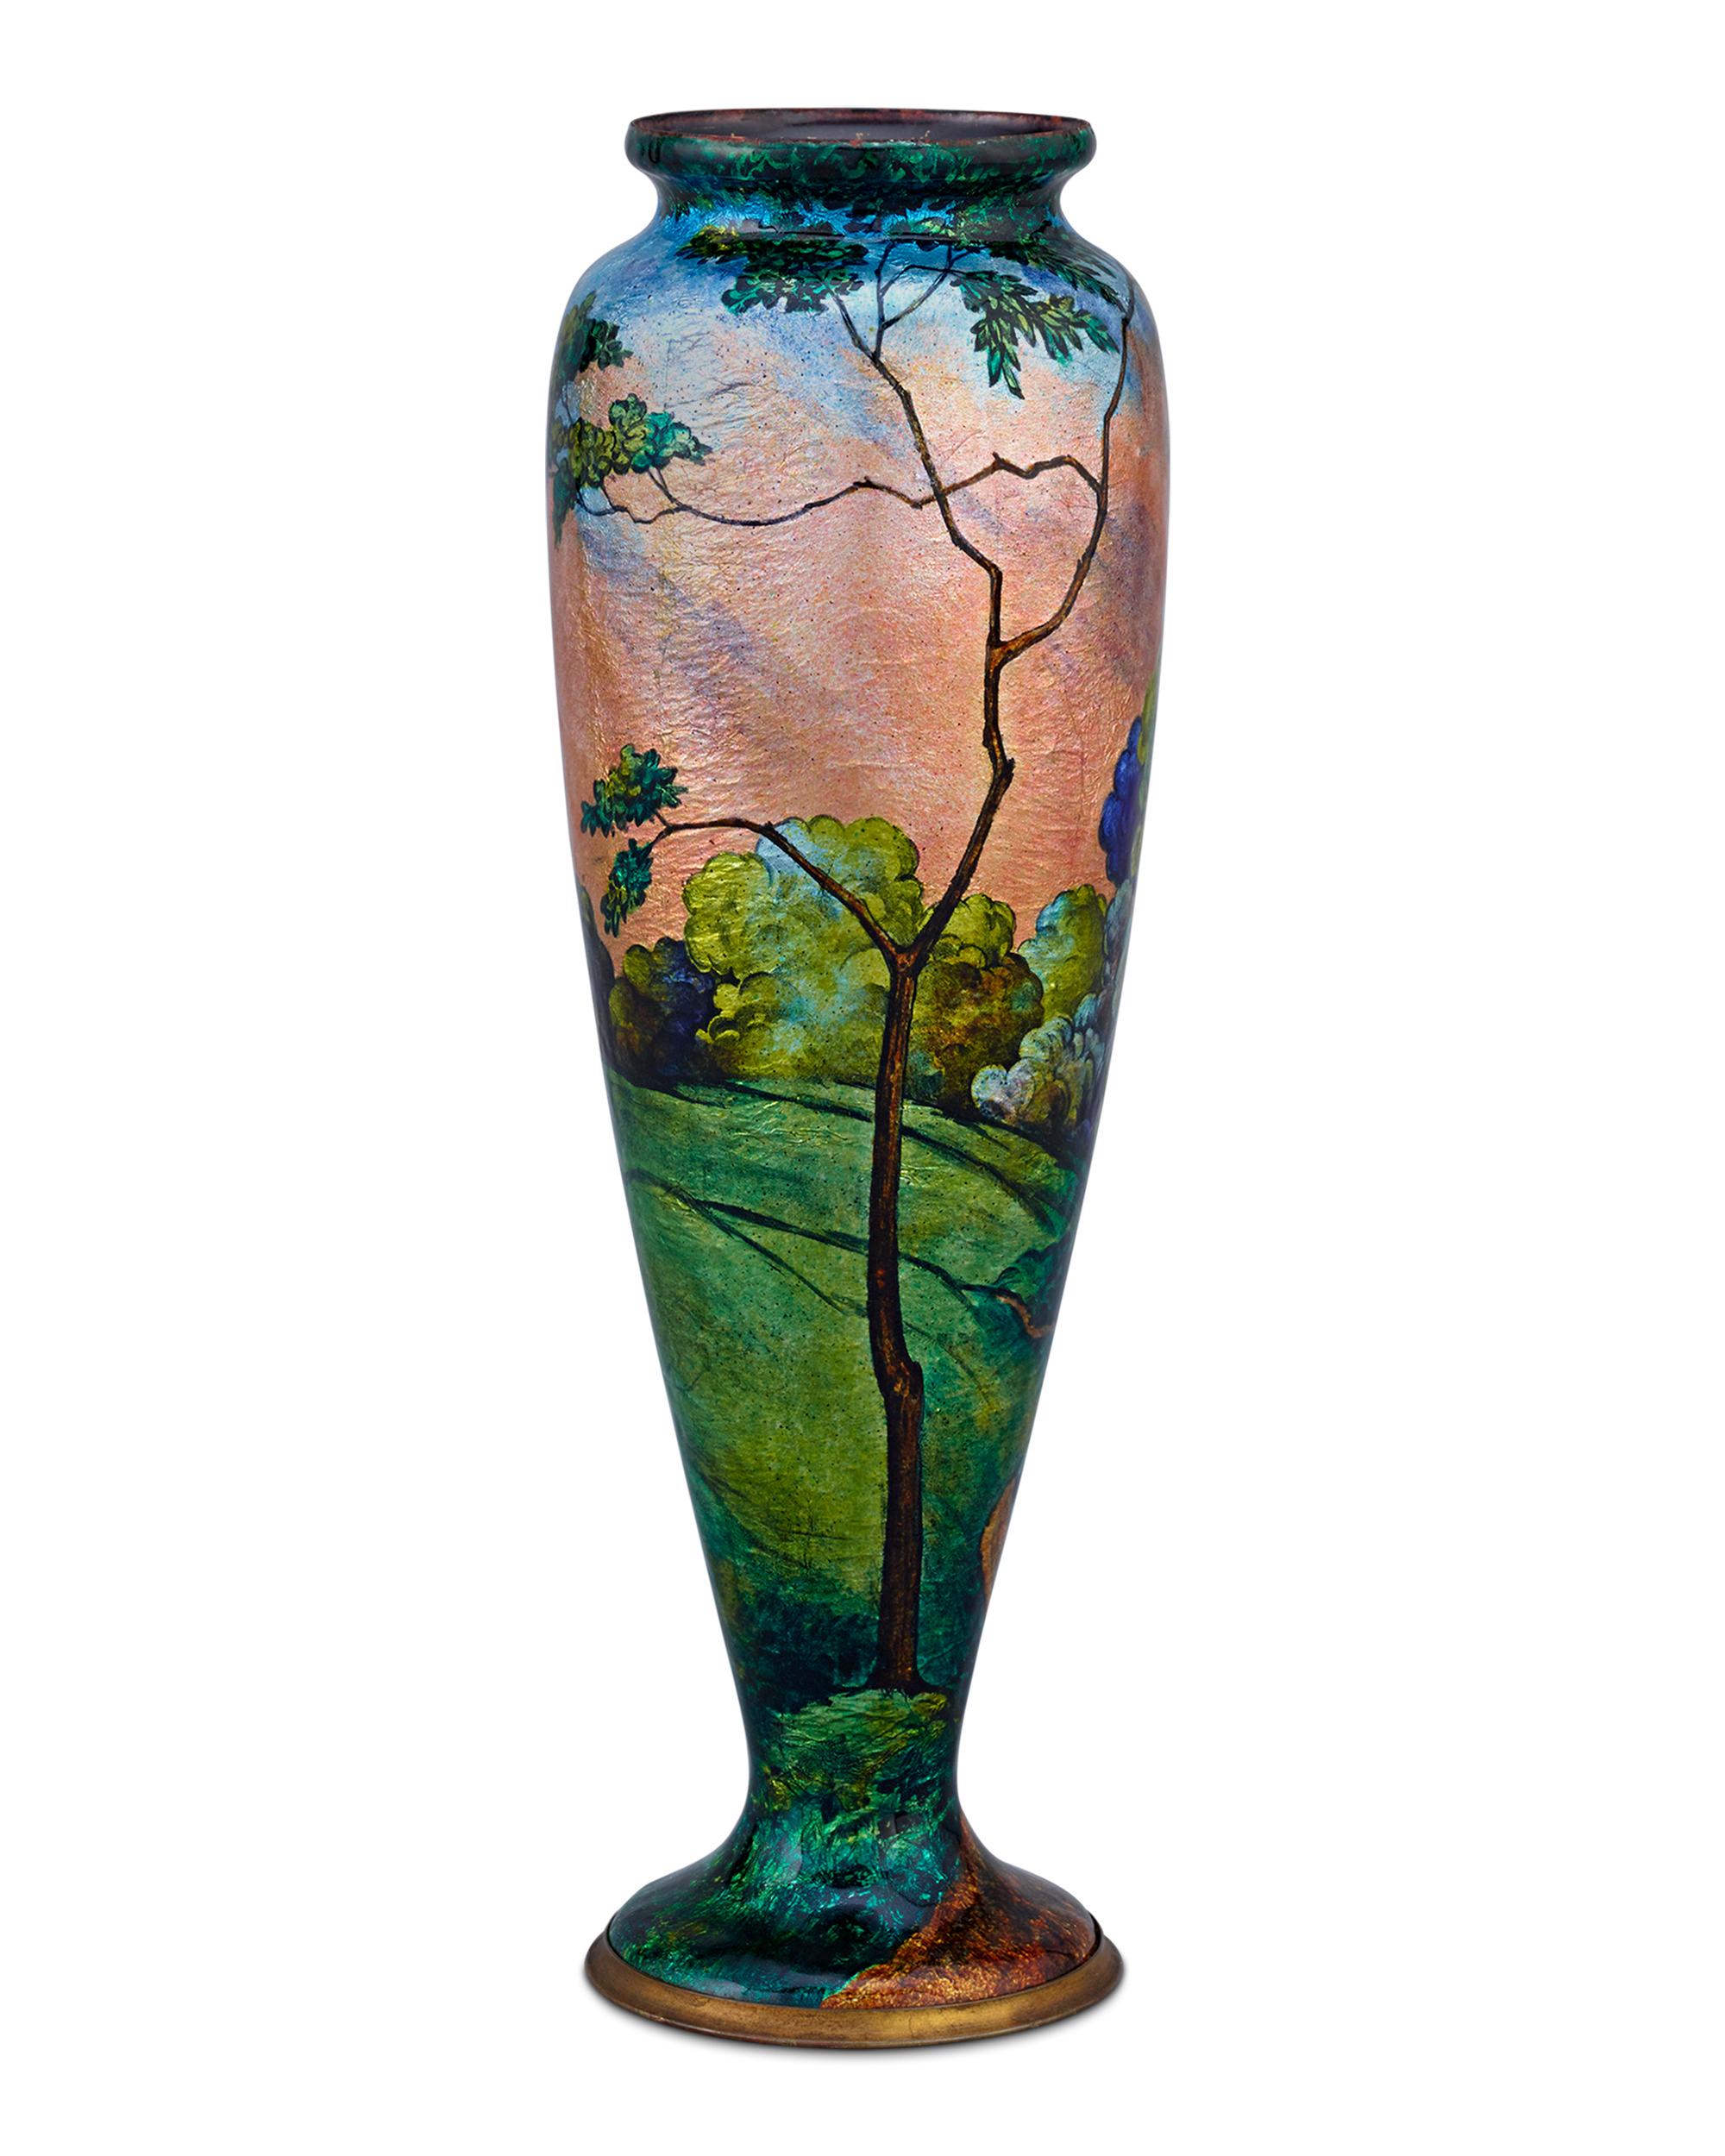 An enameled landscape awash with the soft light of dusk decorates this vase by the renowned Camille Fauré. It demonstrates Fauré's signature raised enameling, which is achieved by applying silver leaf and an enamel paste to a copper form and